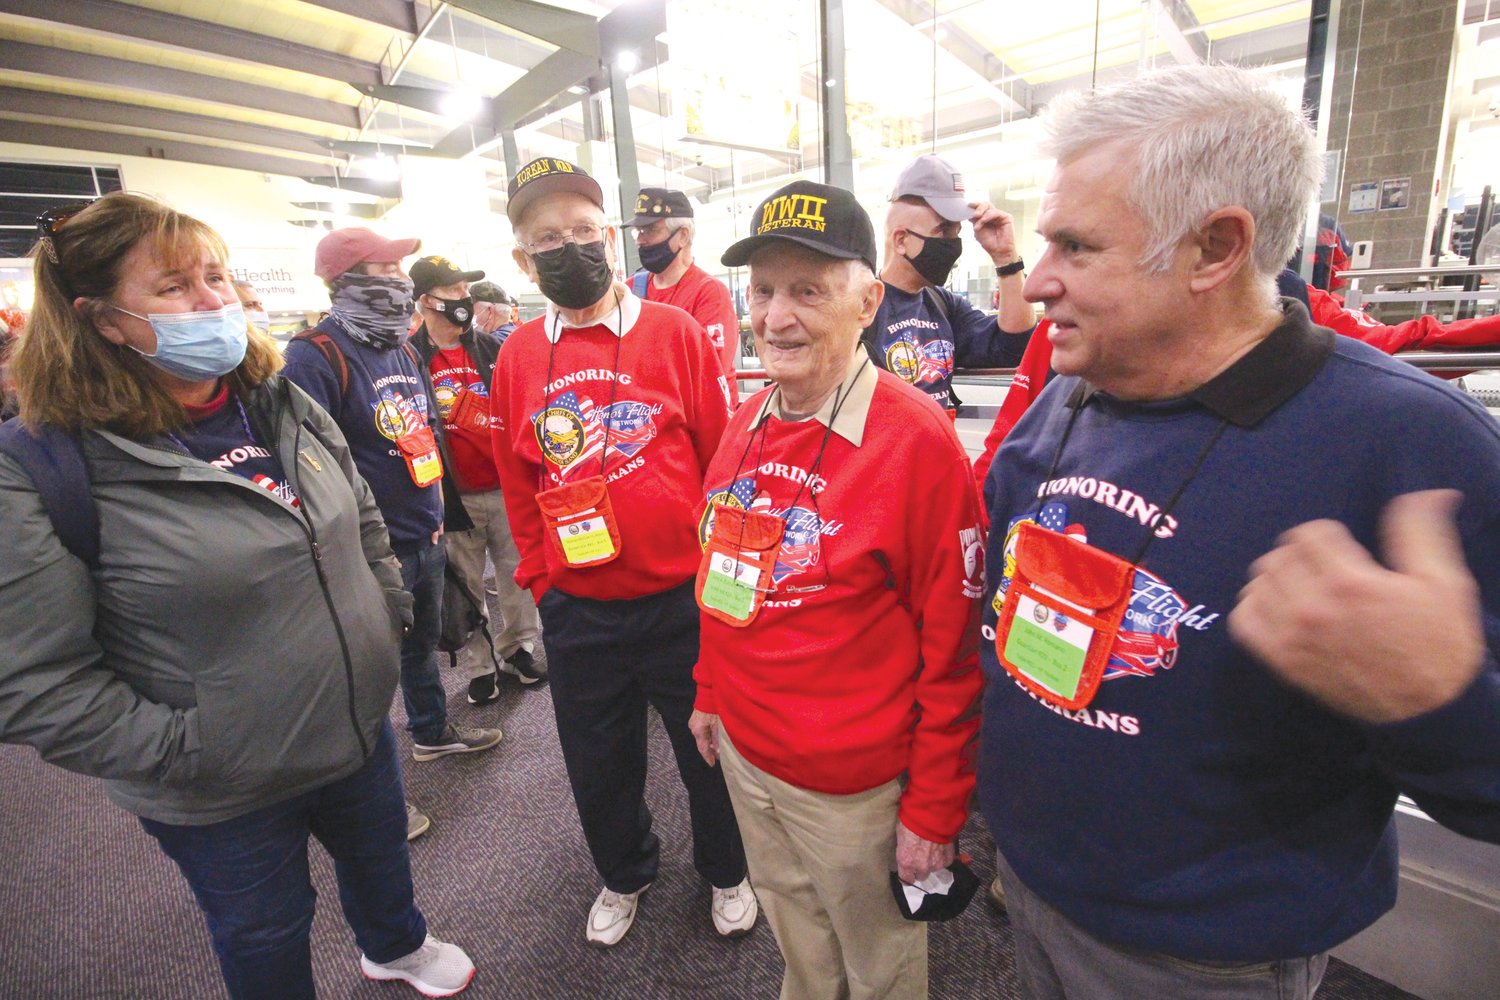 SON SERVES AS GUARDIAN: Guardian Nancy Perda, left, Navy veteran Thomas McGee III ; WWII veteran John Romano and his son John chat before marching to the departure gate. John served as his father’s guardian.